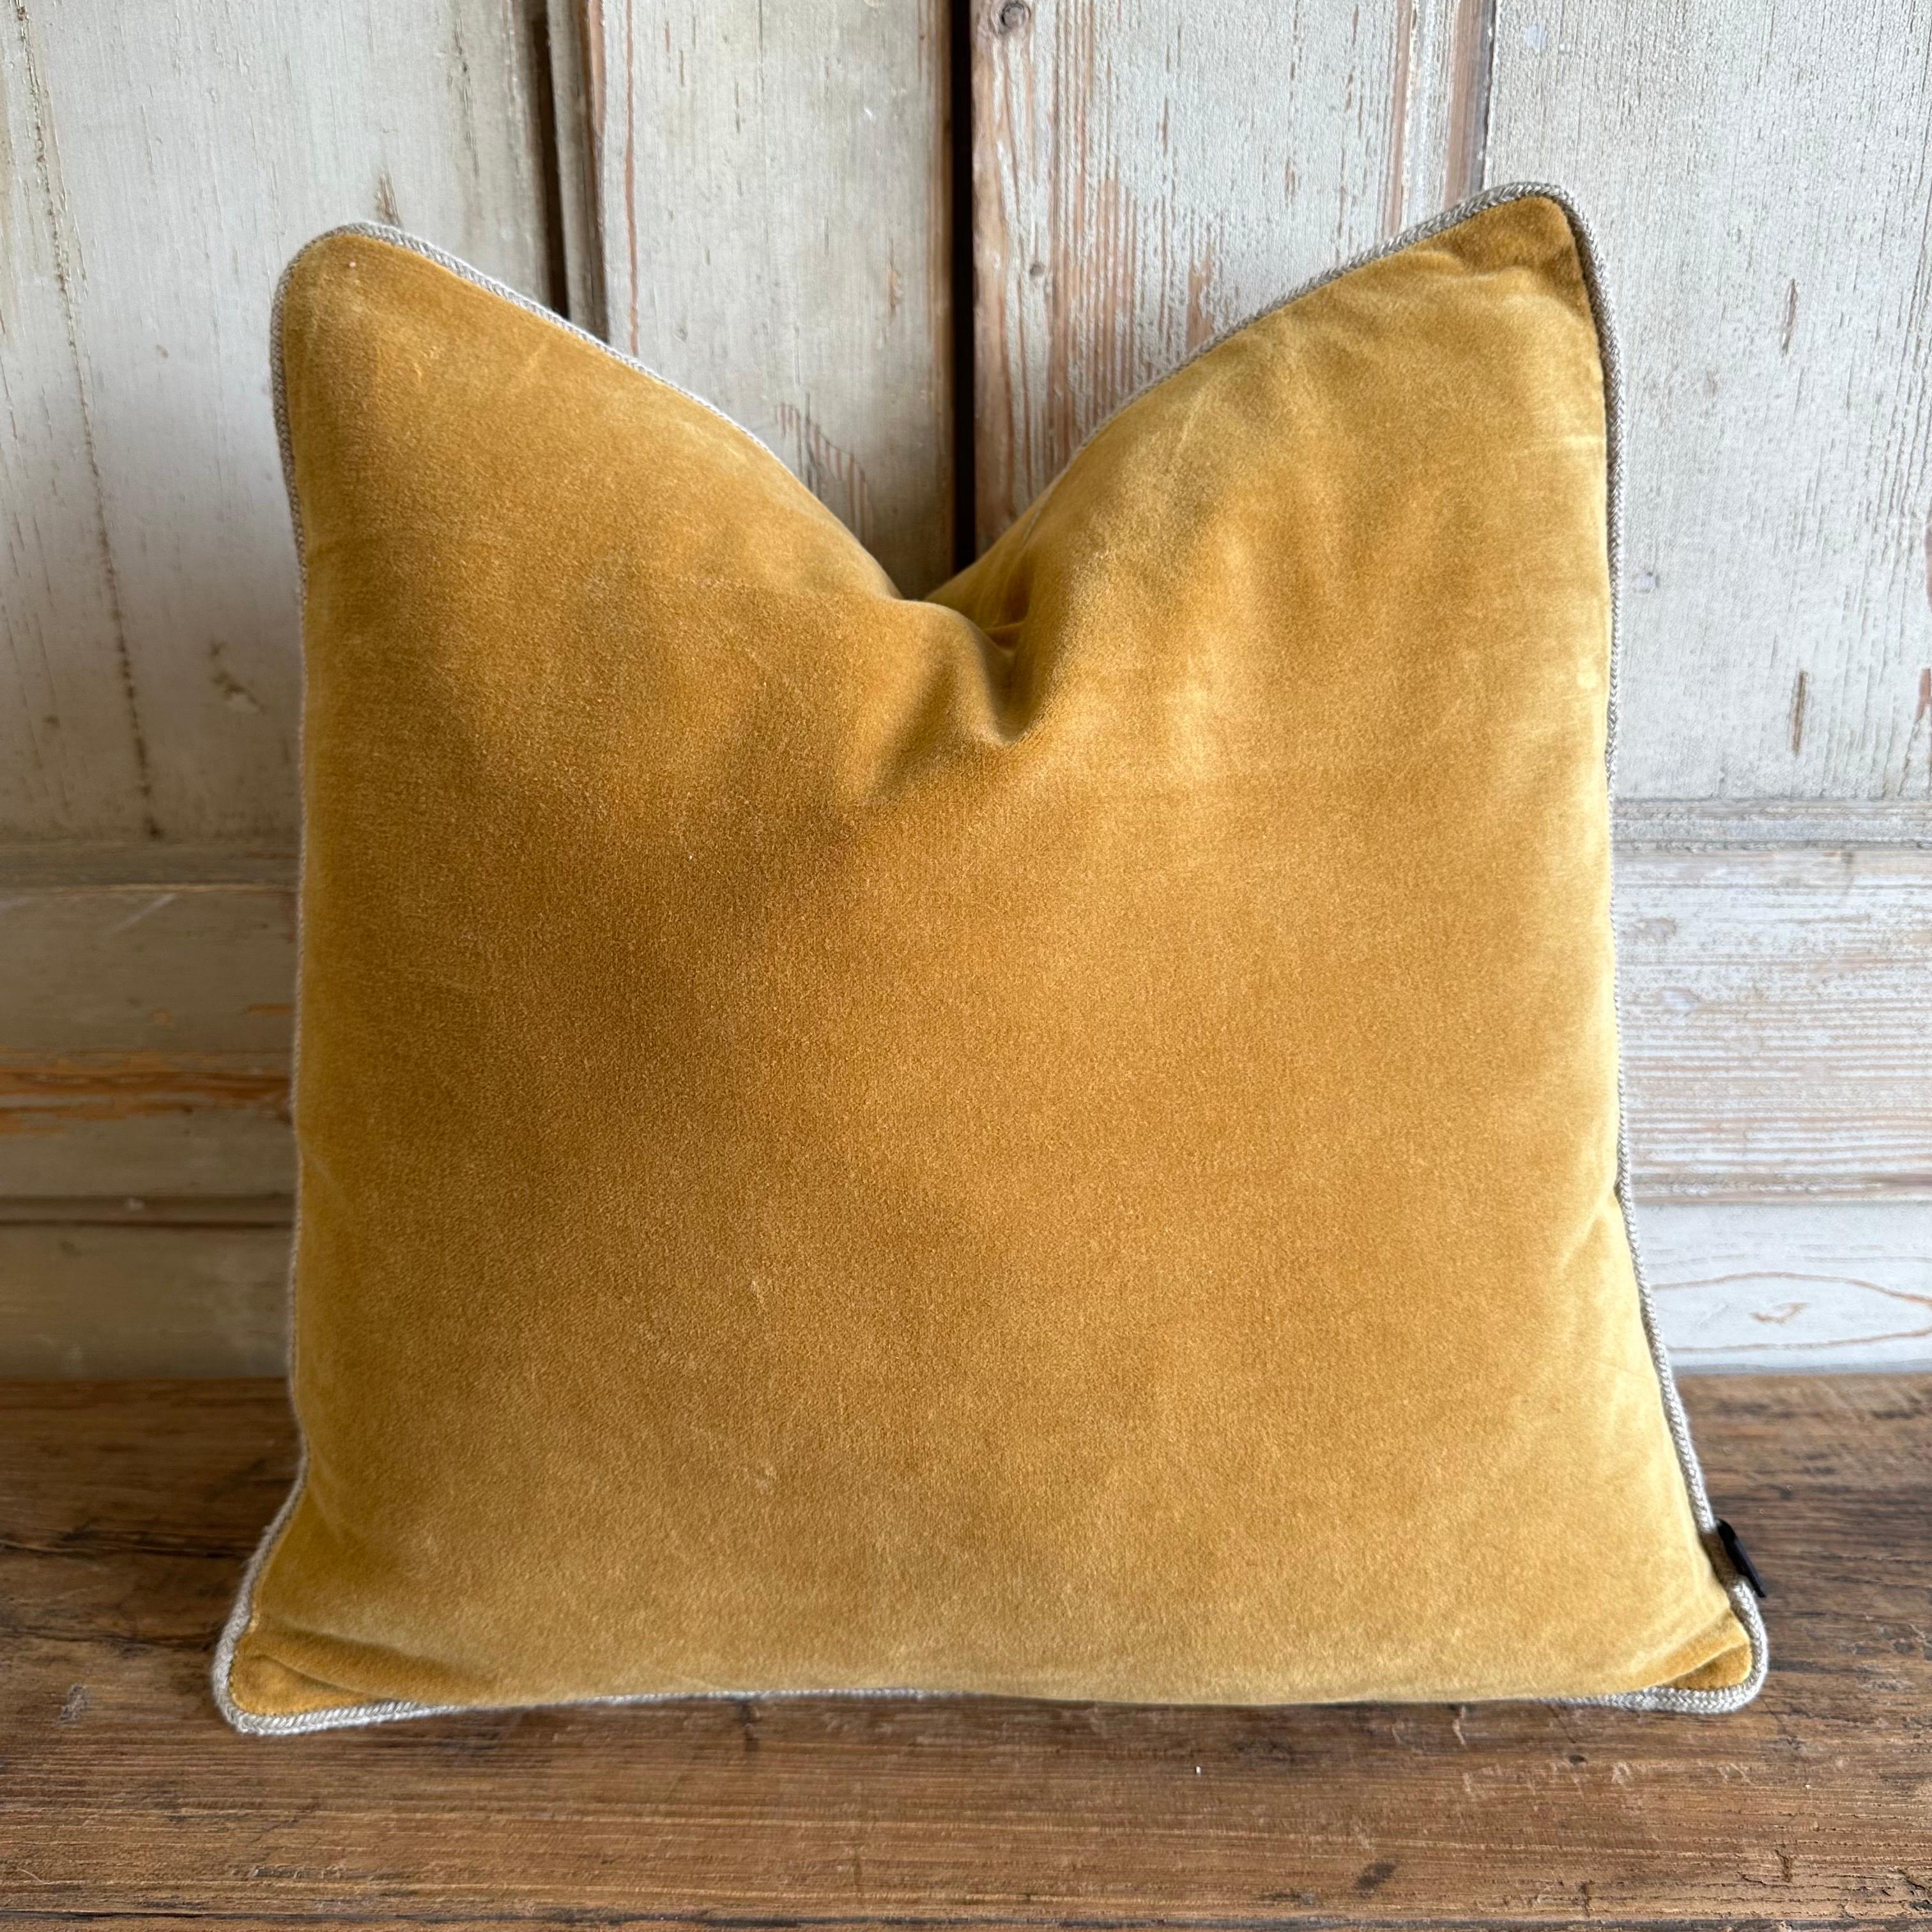 French cotton velvet lumbar pillow with jute trim.
French cotton velvet lumbar pillow with jute trim. Zipper closure, 90/10 down feather insert pillow is included.
size: 18x18
Color: Chamois; a faded dijon with light tan coloring
100% Cotton